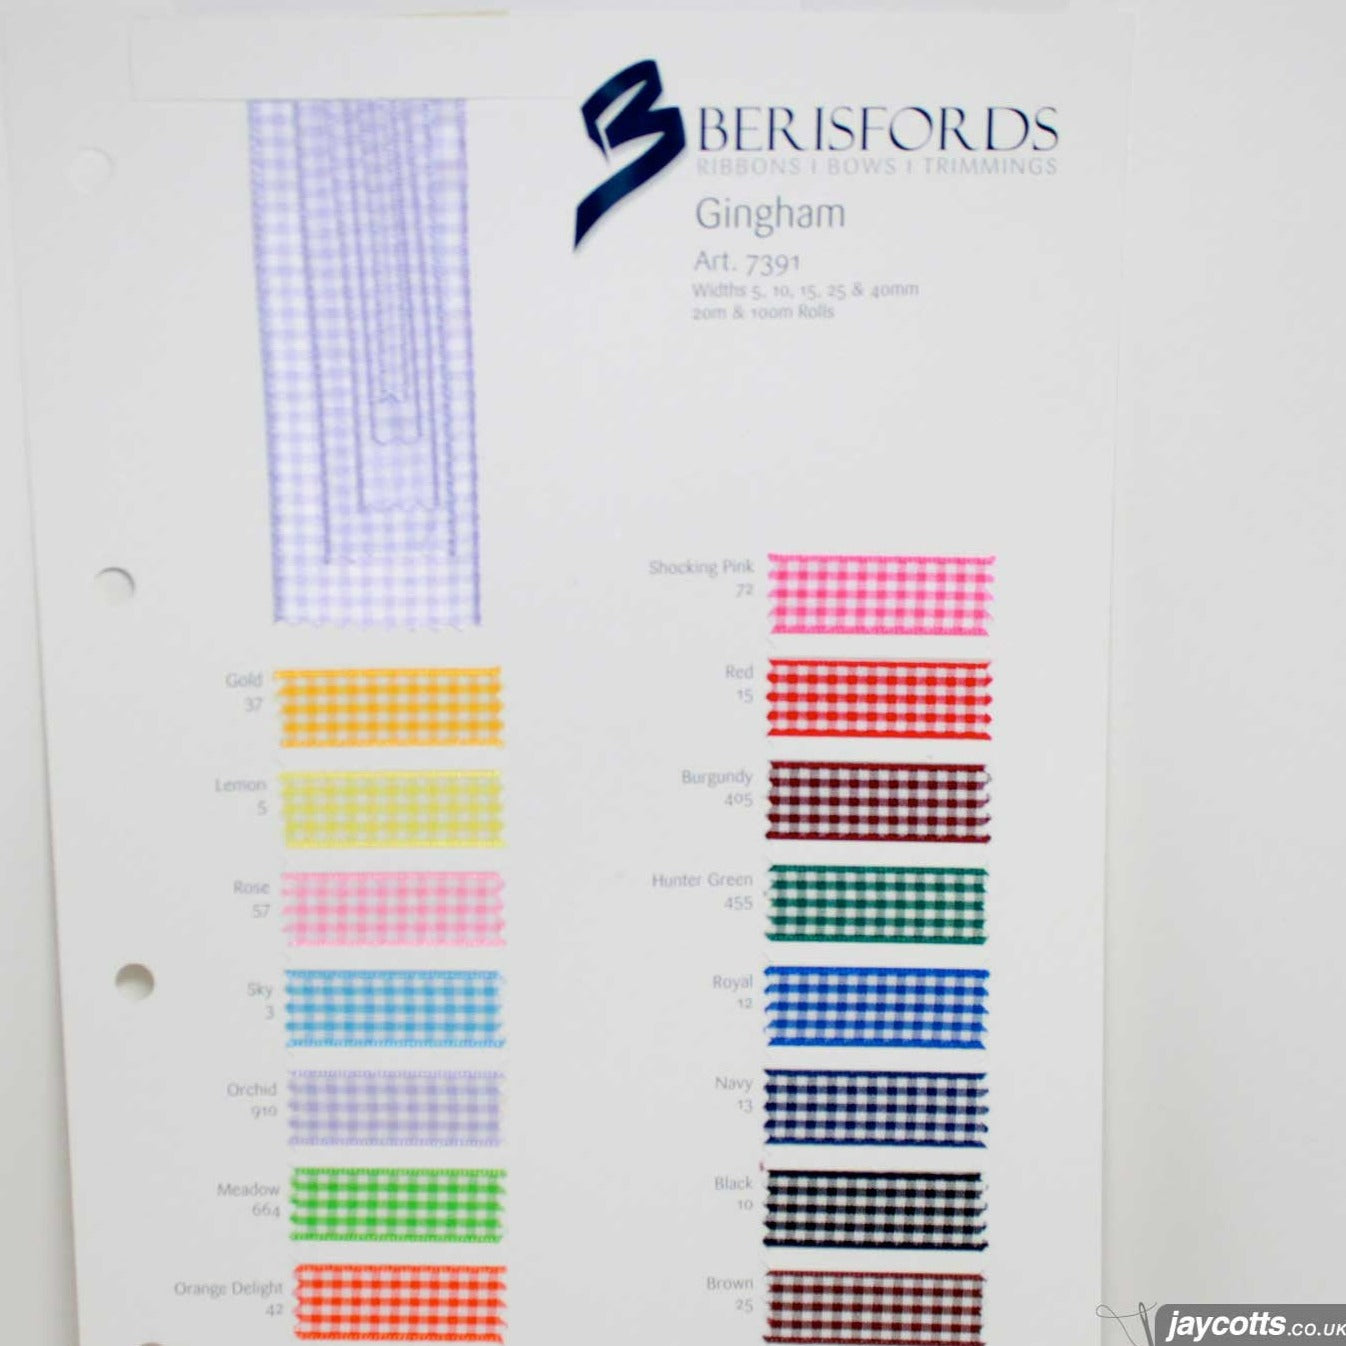 Berisfords Gingham Ribbon: Sample Card from Jaycotts Sewing Supplies